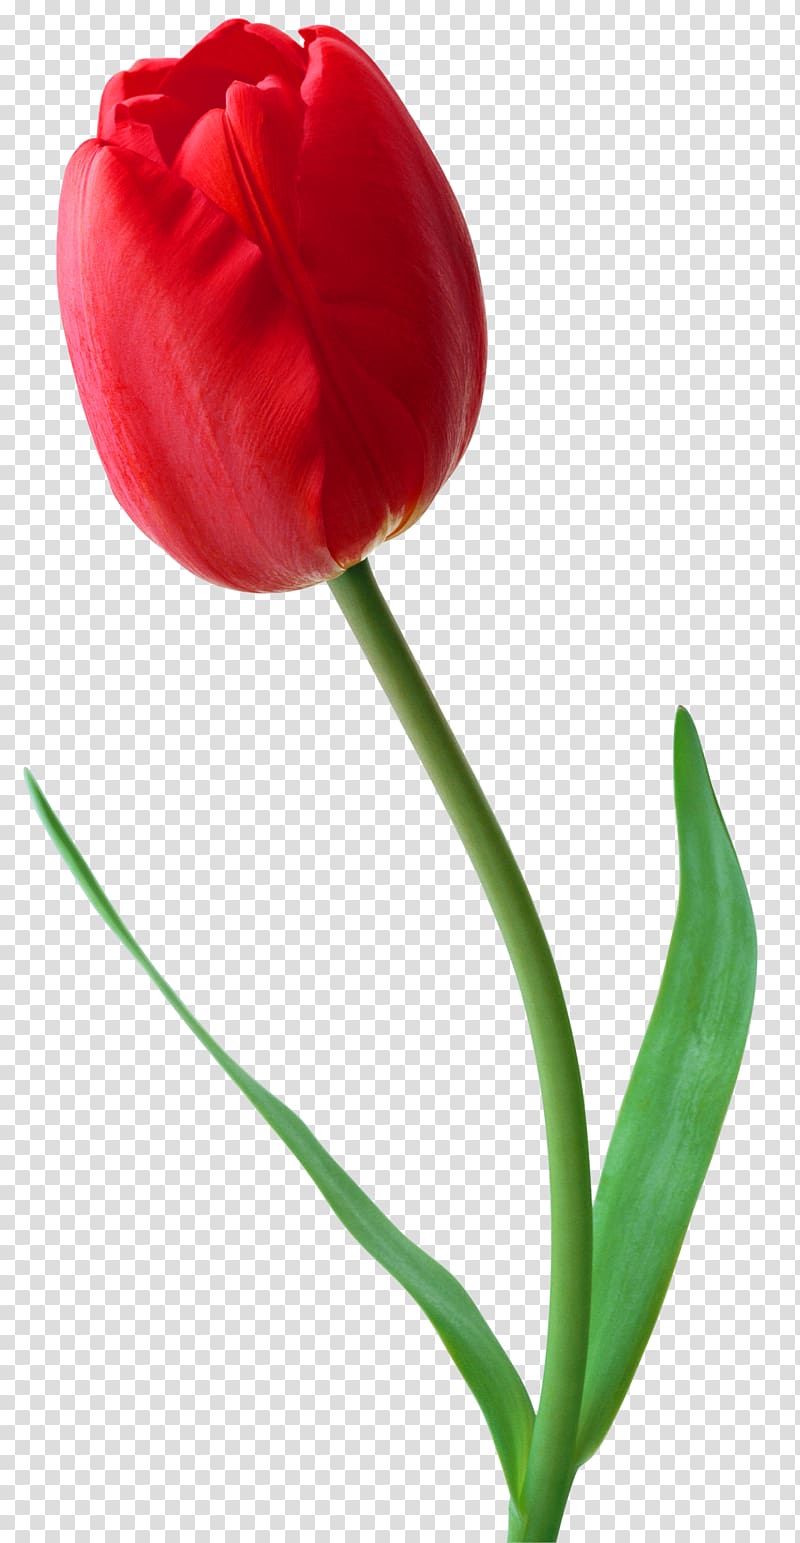 Tehran Black Friday Iranian Revolution Keh 2017–18 Iranian protests, Large Red Tulip , red tulip transparent background PNG clipart